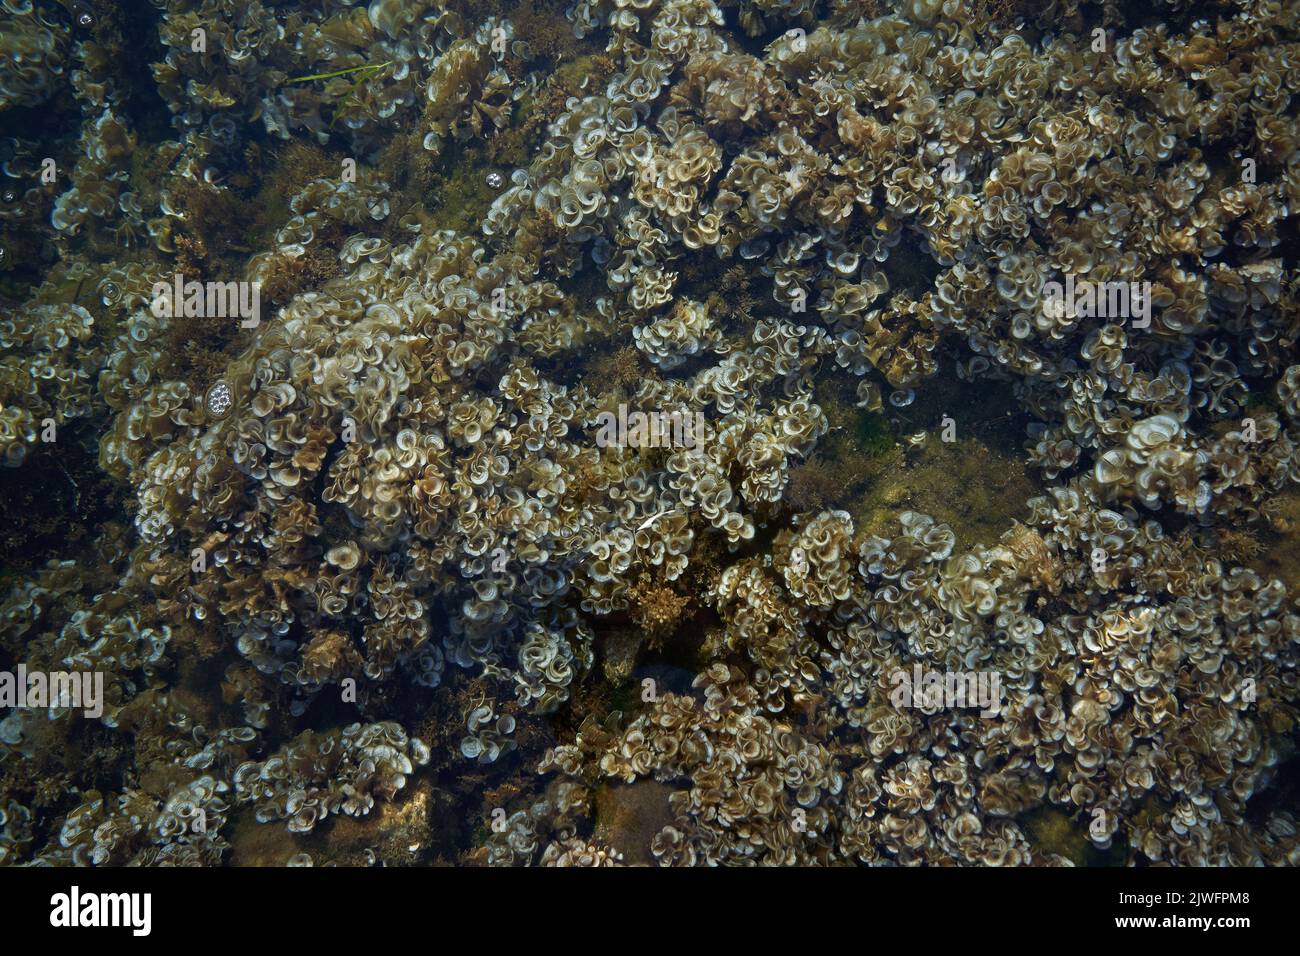 Algae in the clear water of the sea Stock Photo